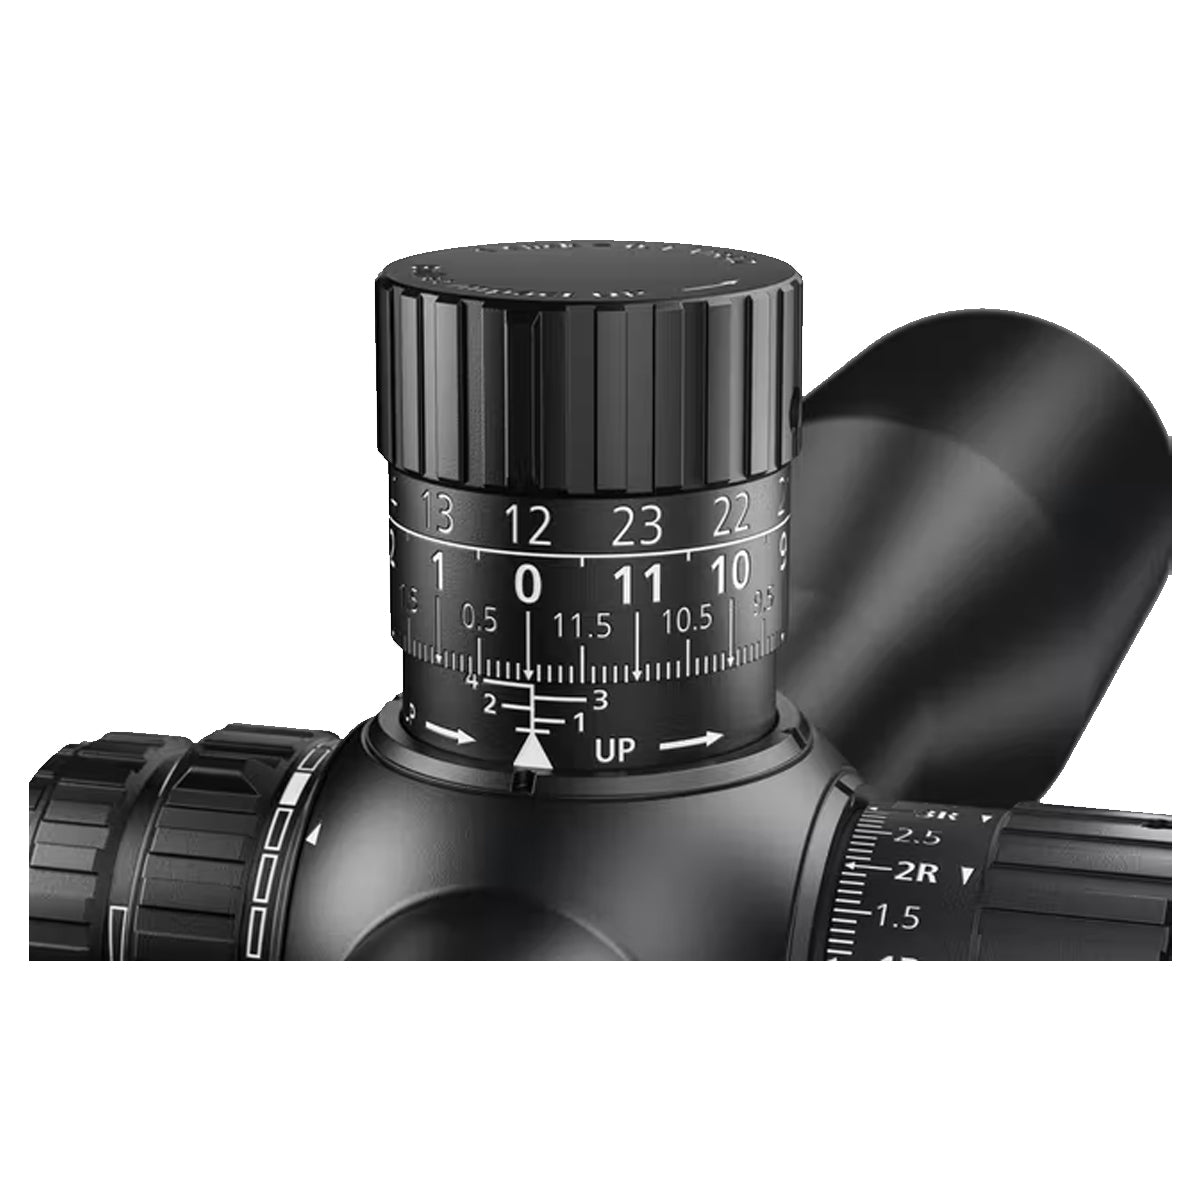 Zeiss LRP S5 5-25x56 ZF-MRI Reticle #16